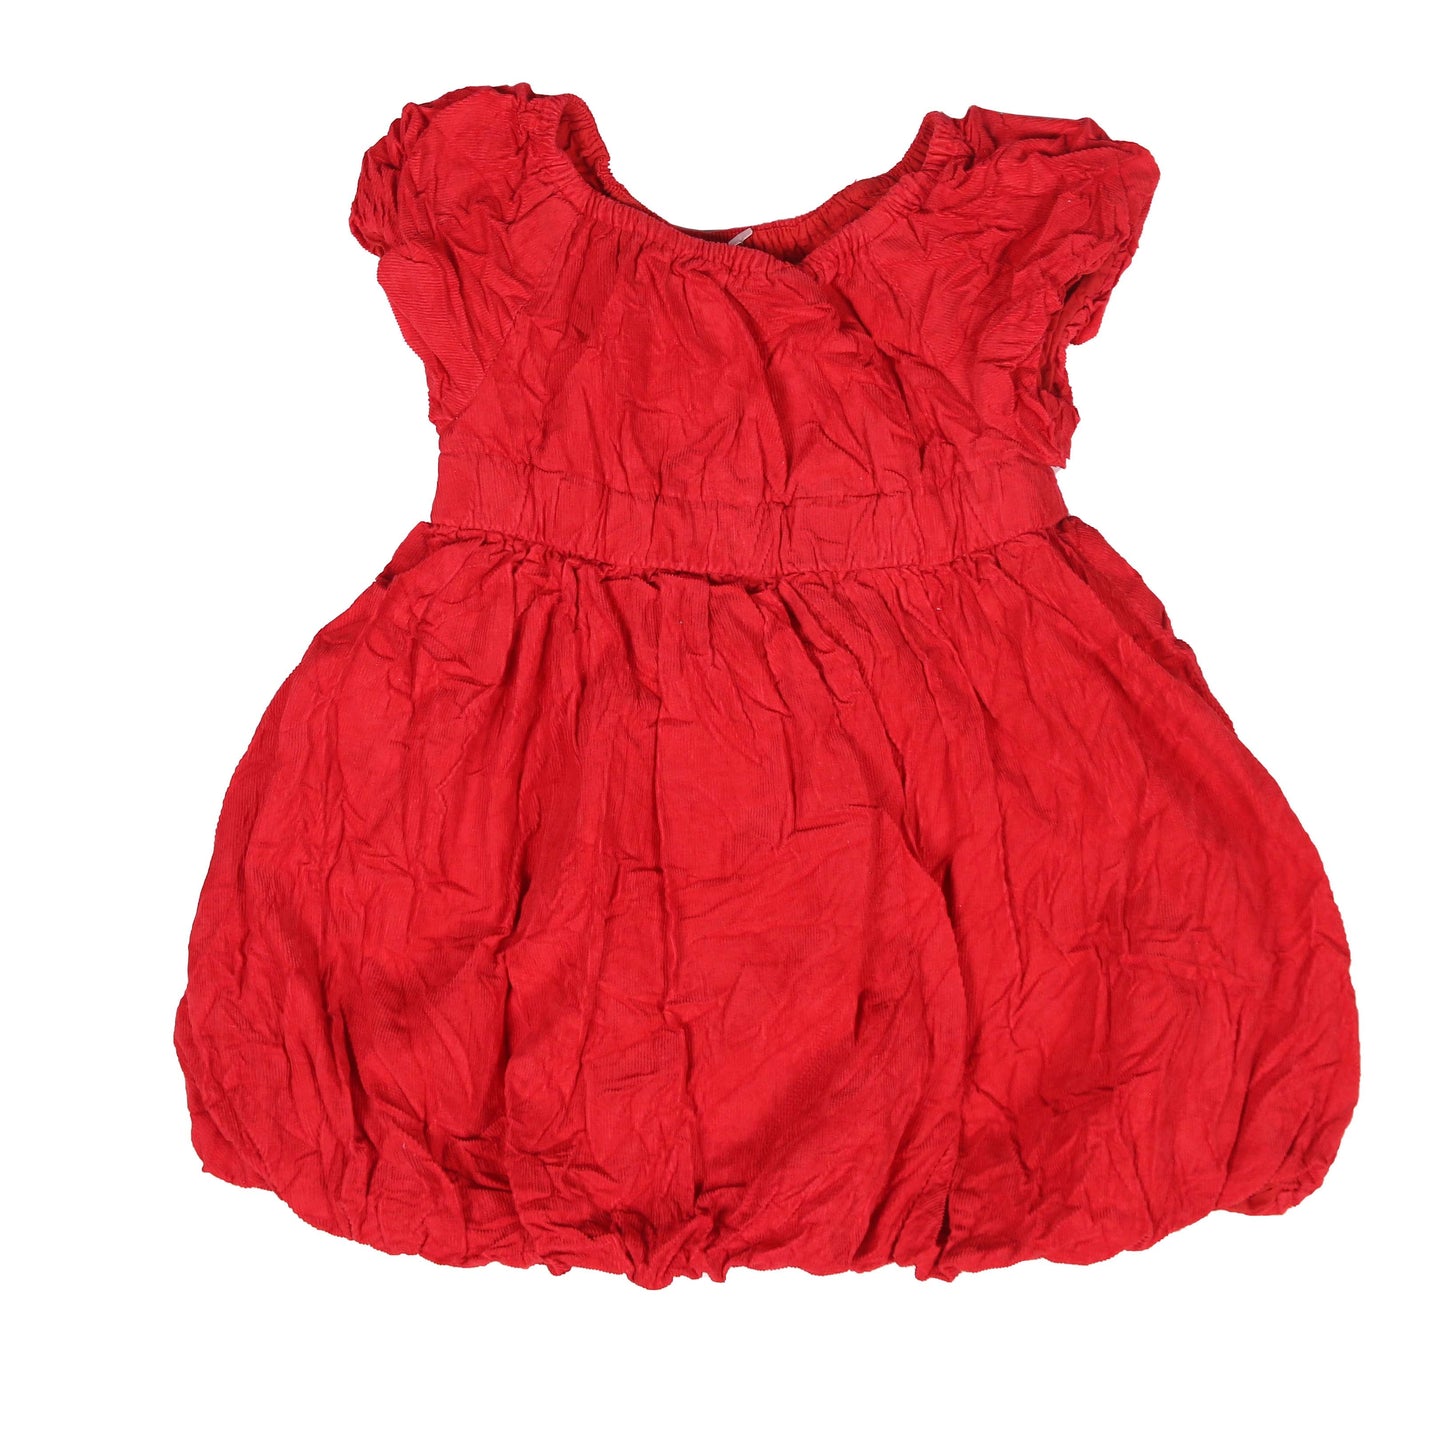 OLD NAVY RED FROCK